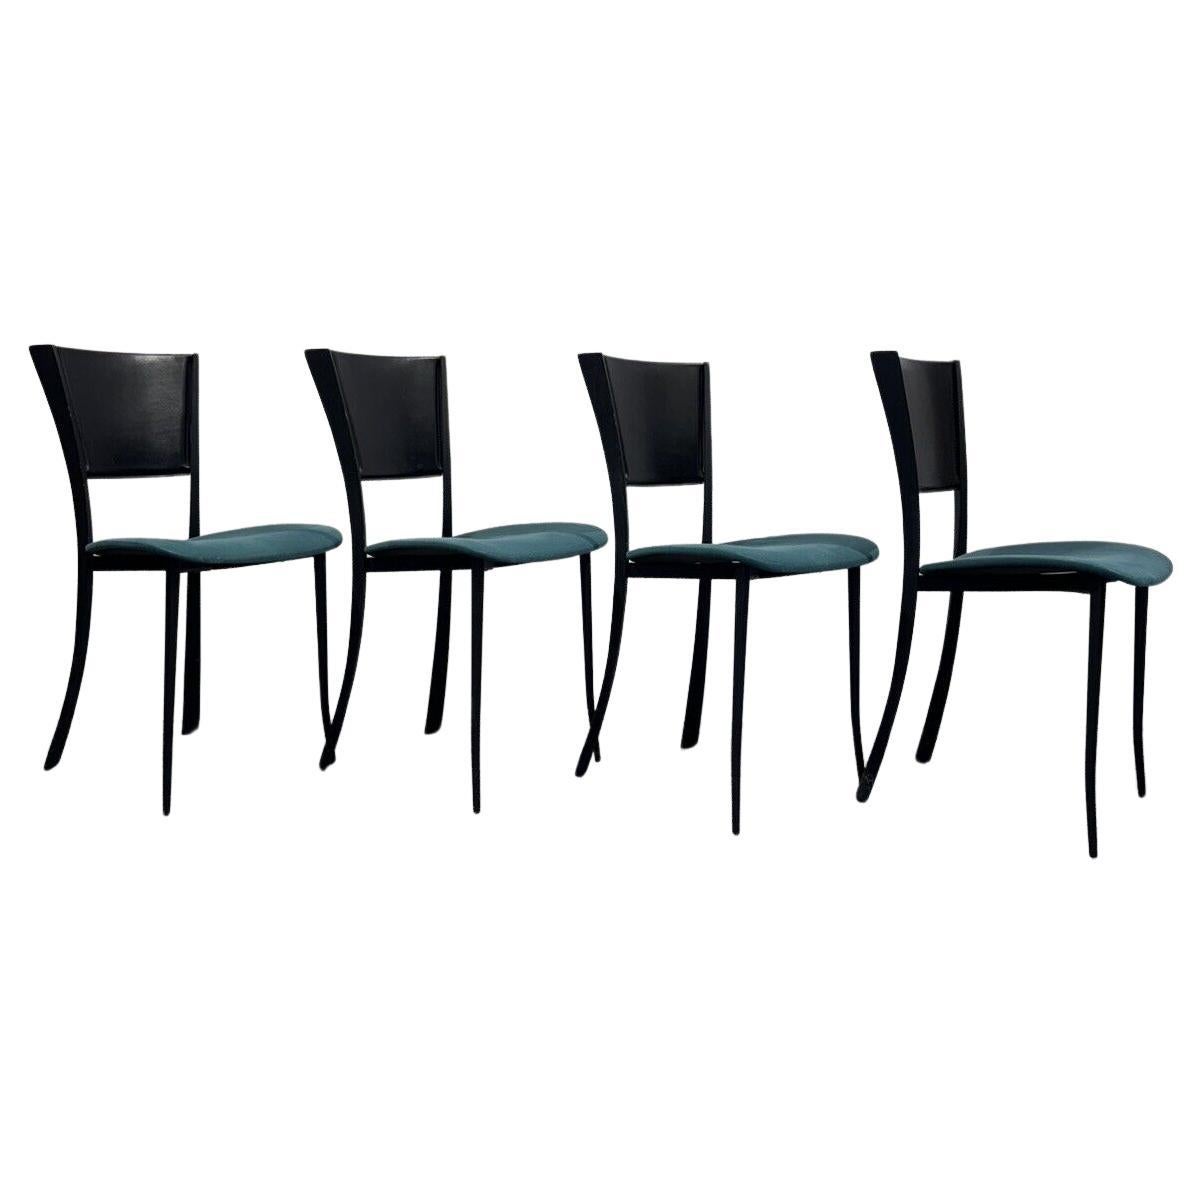 Set Of 4 Postmodern Chairs Modern Design For Sale